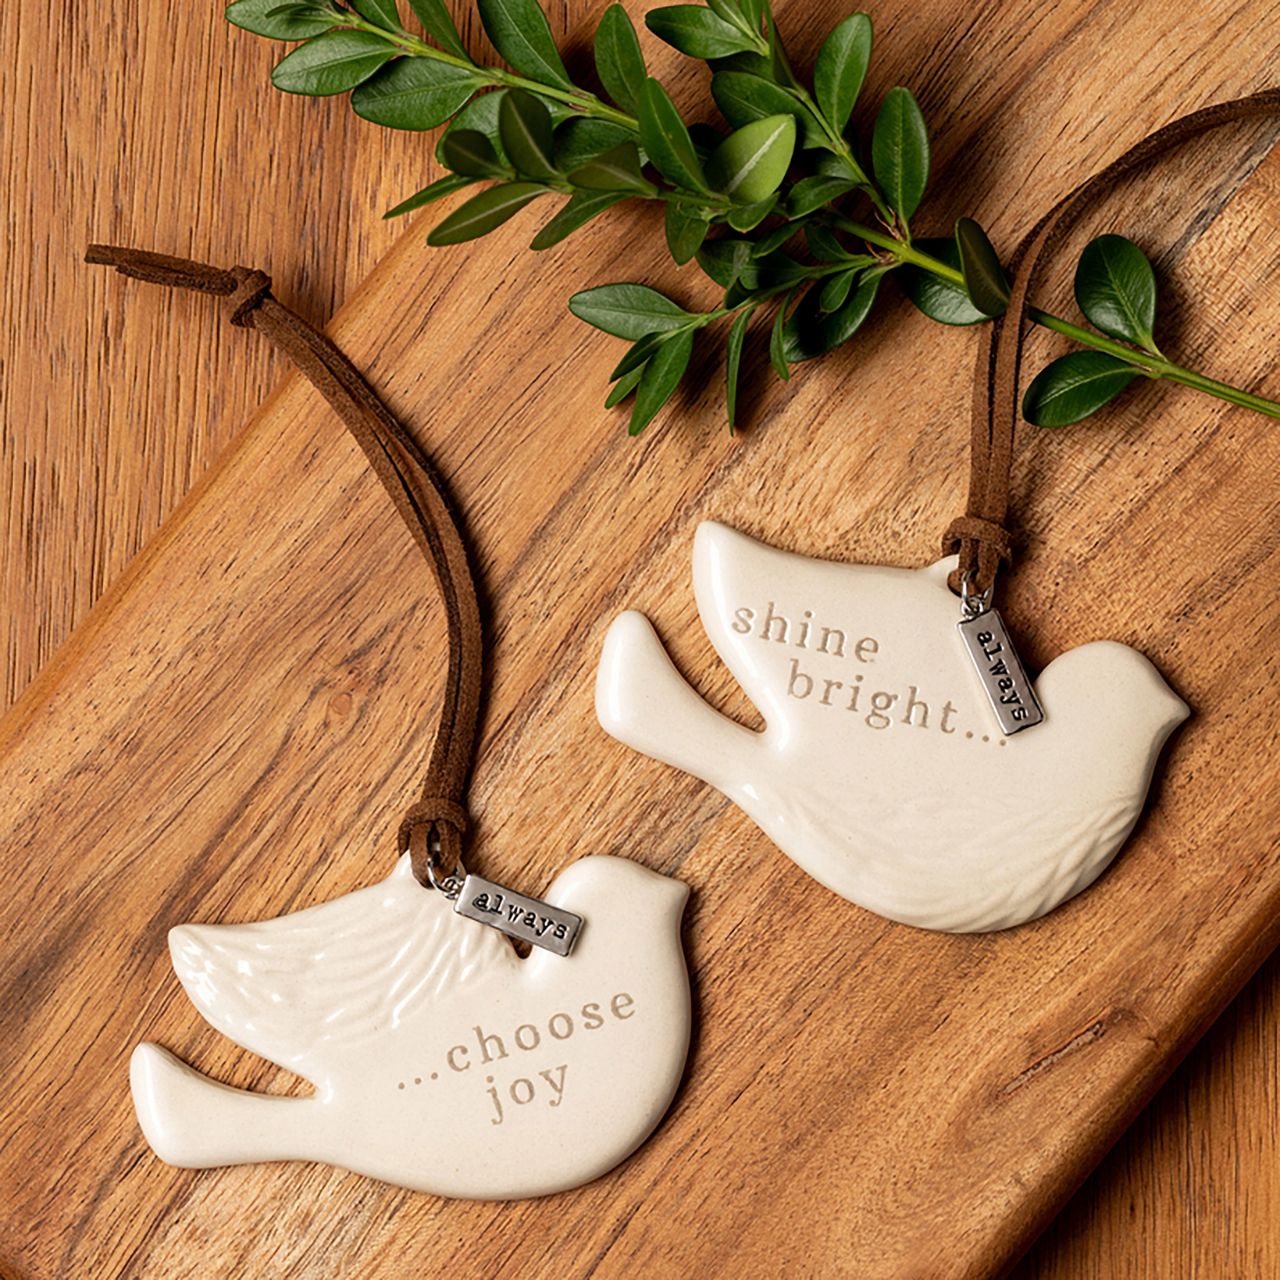 Hope One to Keep, One to Share Ornament Set  The Meaningful Moments collection helps you mark and celebrate the special moments in life. The Hope One to Keep, One to Share Ornaments Set are reminders of love that go with both the giver and receiver wherever they go. Made of stoneware. Buy to share with anyone you know whom you want to see reach for the stars.